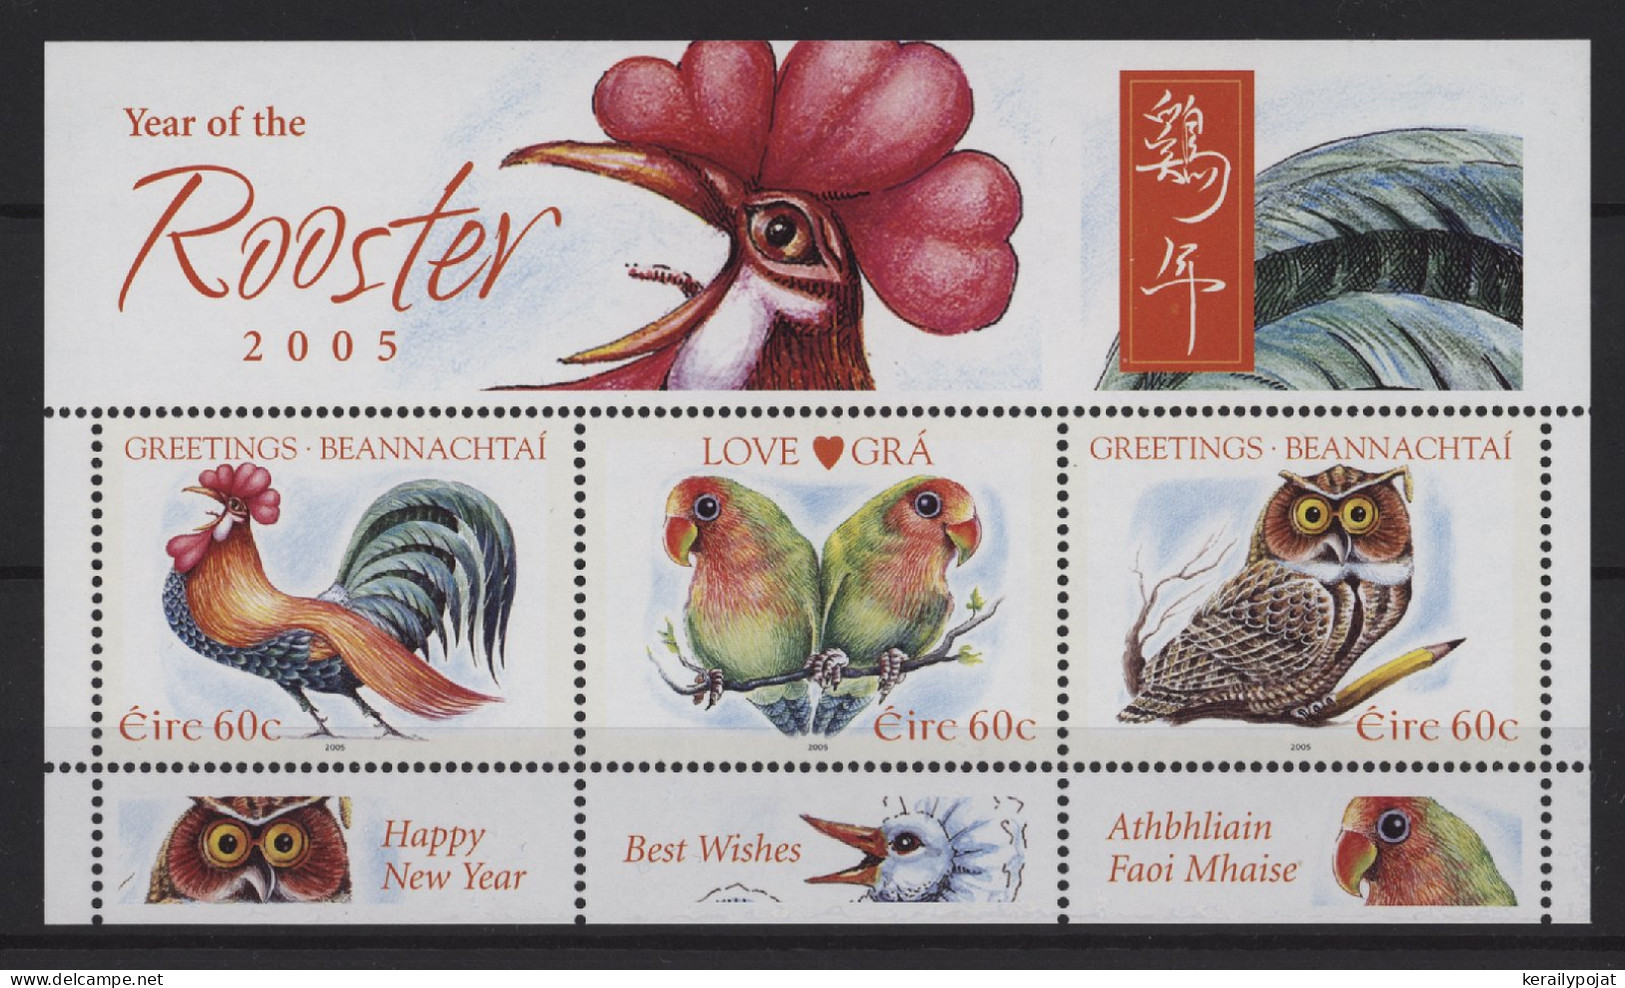 Ireland - 2005 Year Of The Rooster Block MNH__(TH-25956) - Hojas Y Bloques